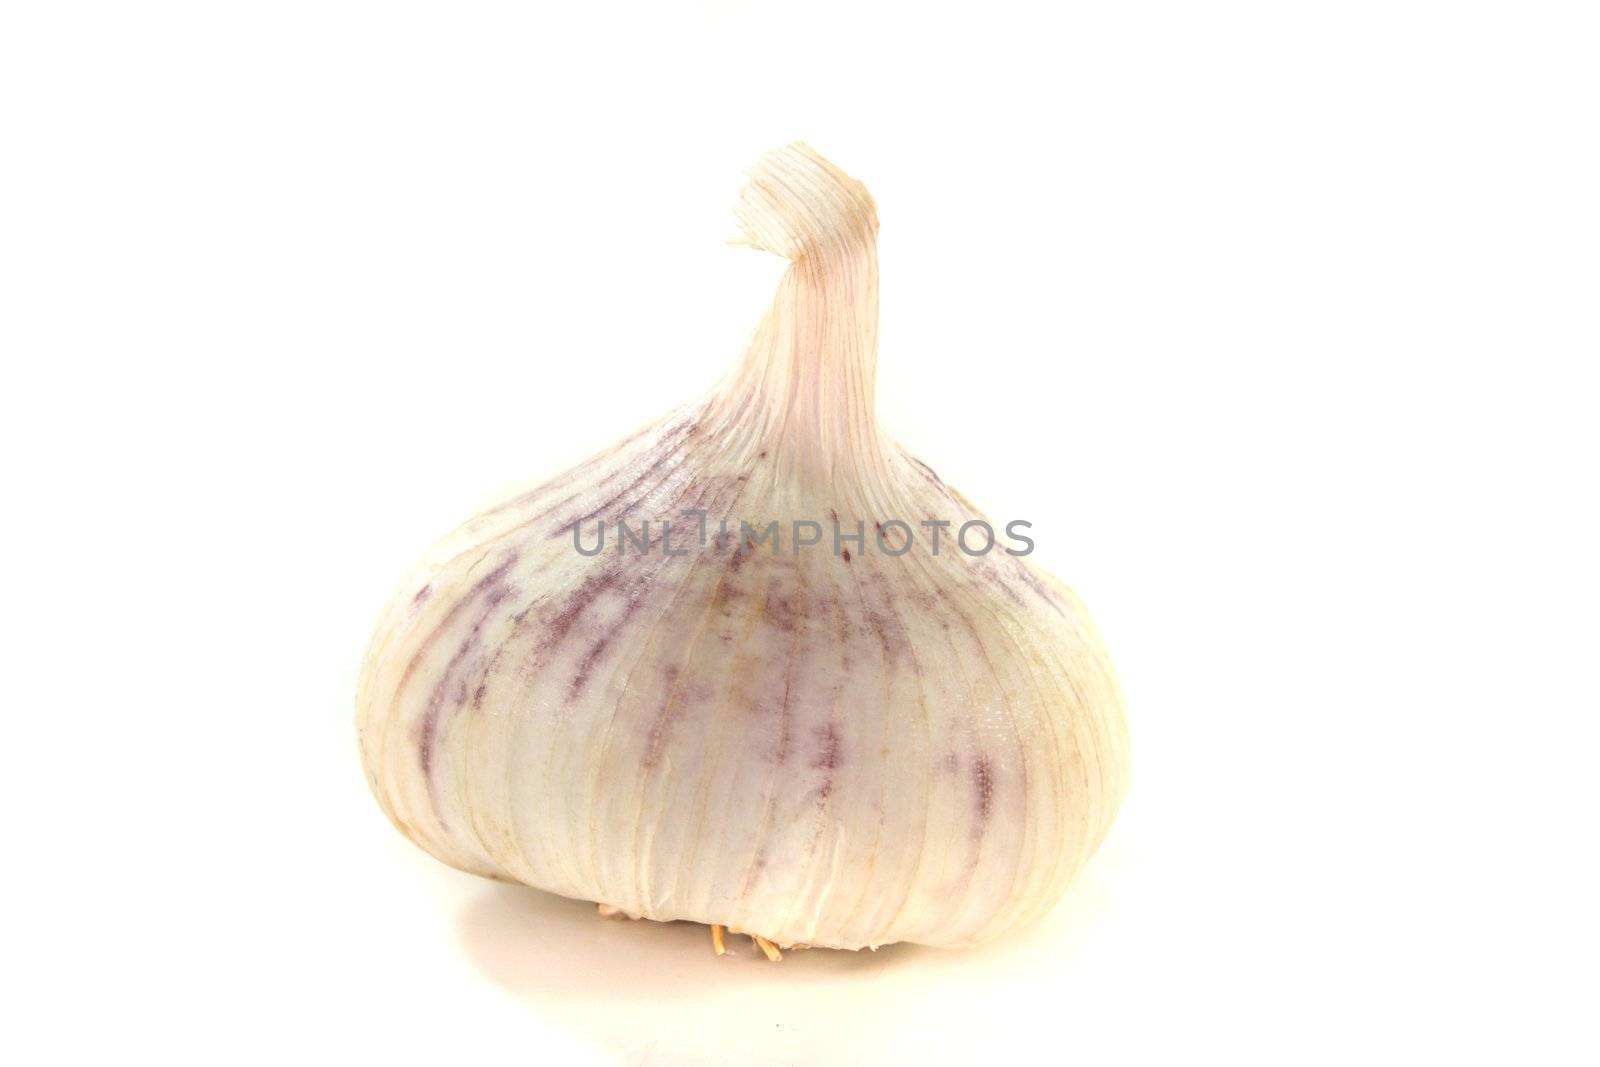 Garlic by discovery